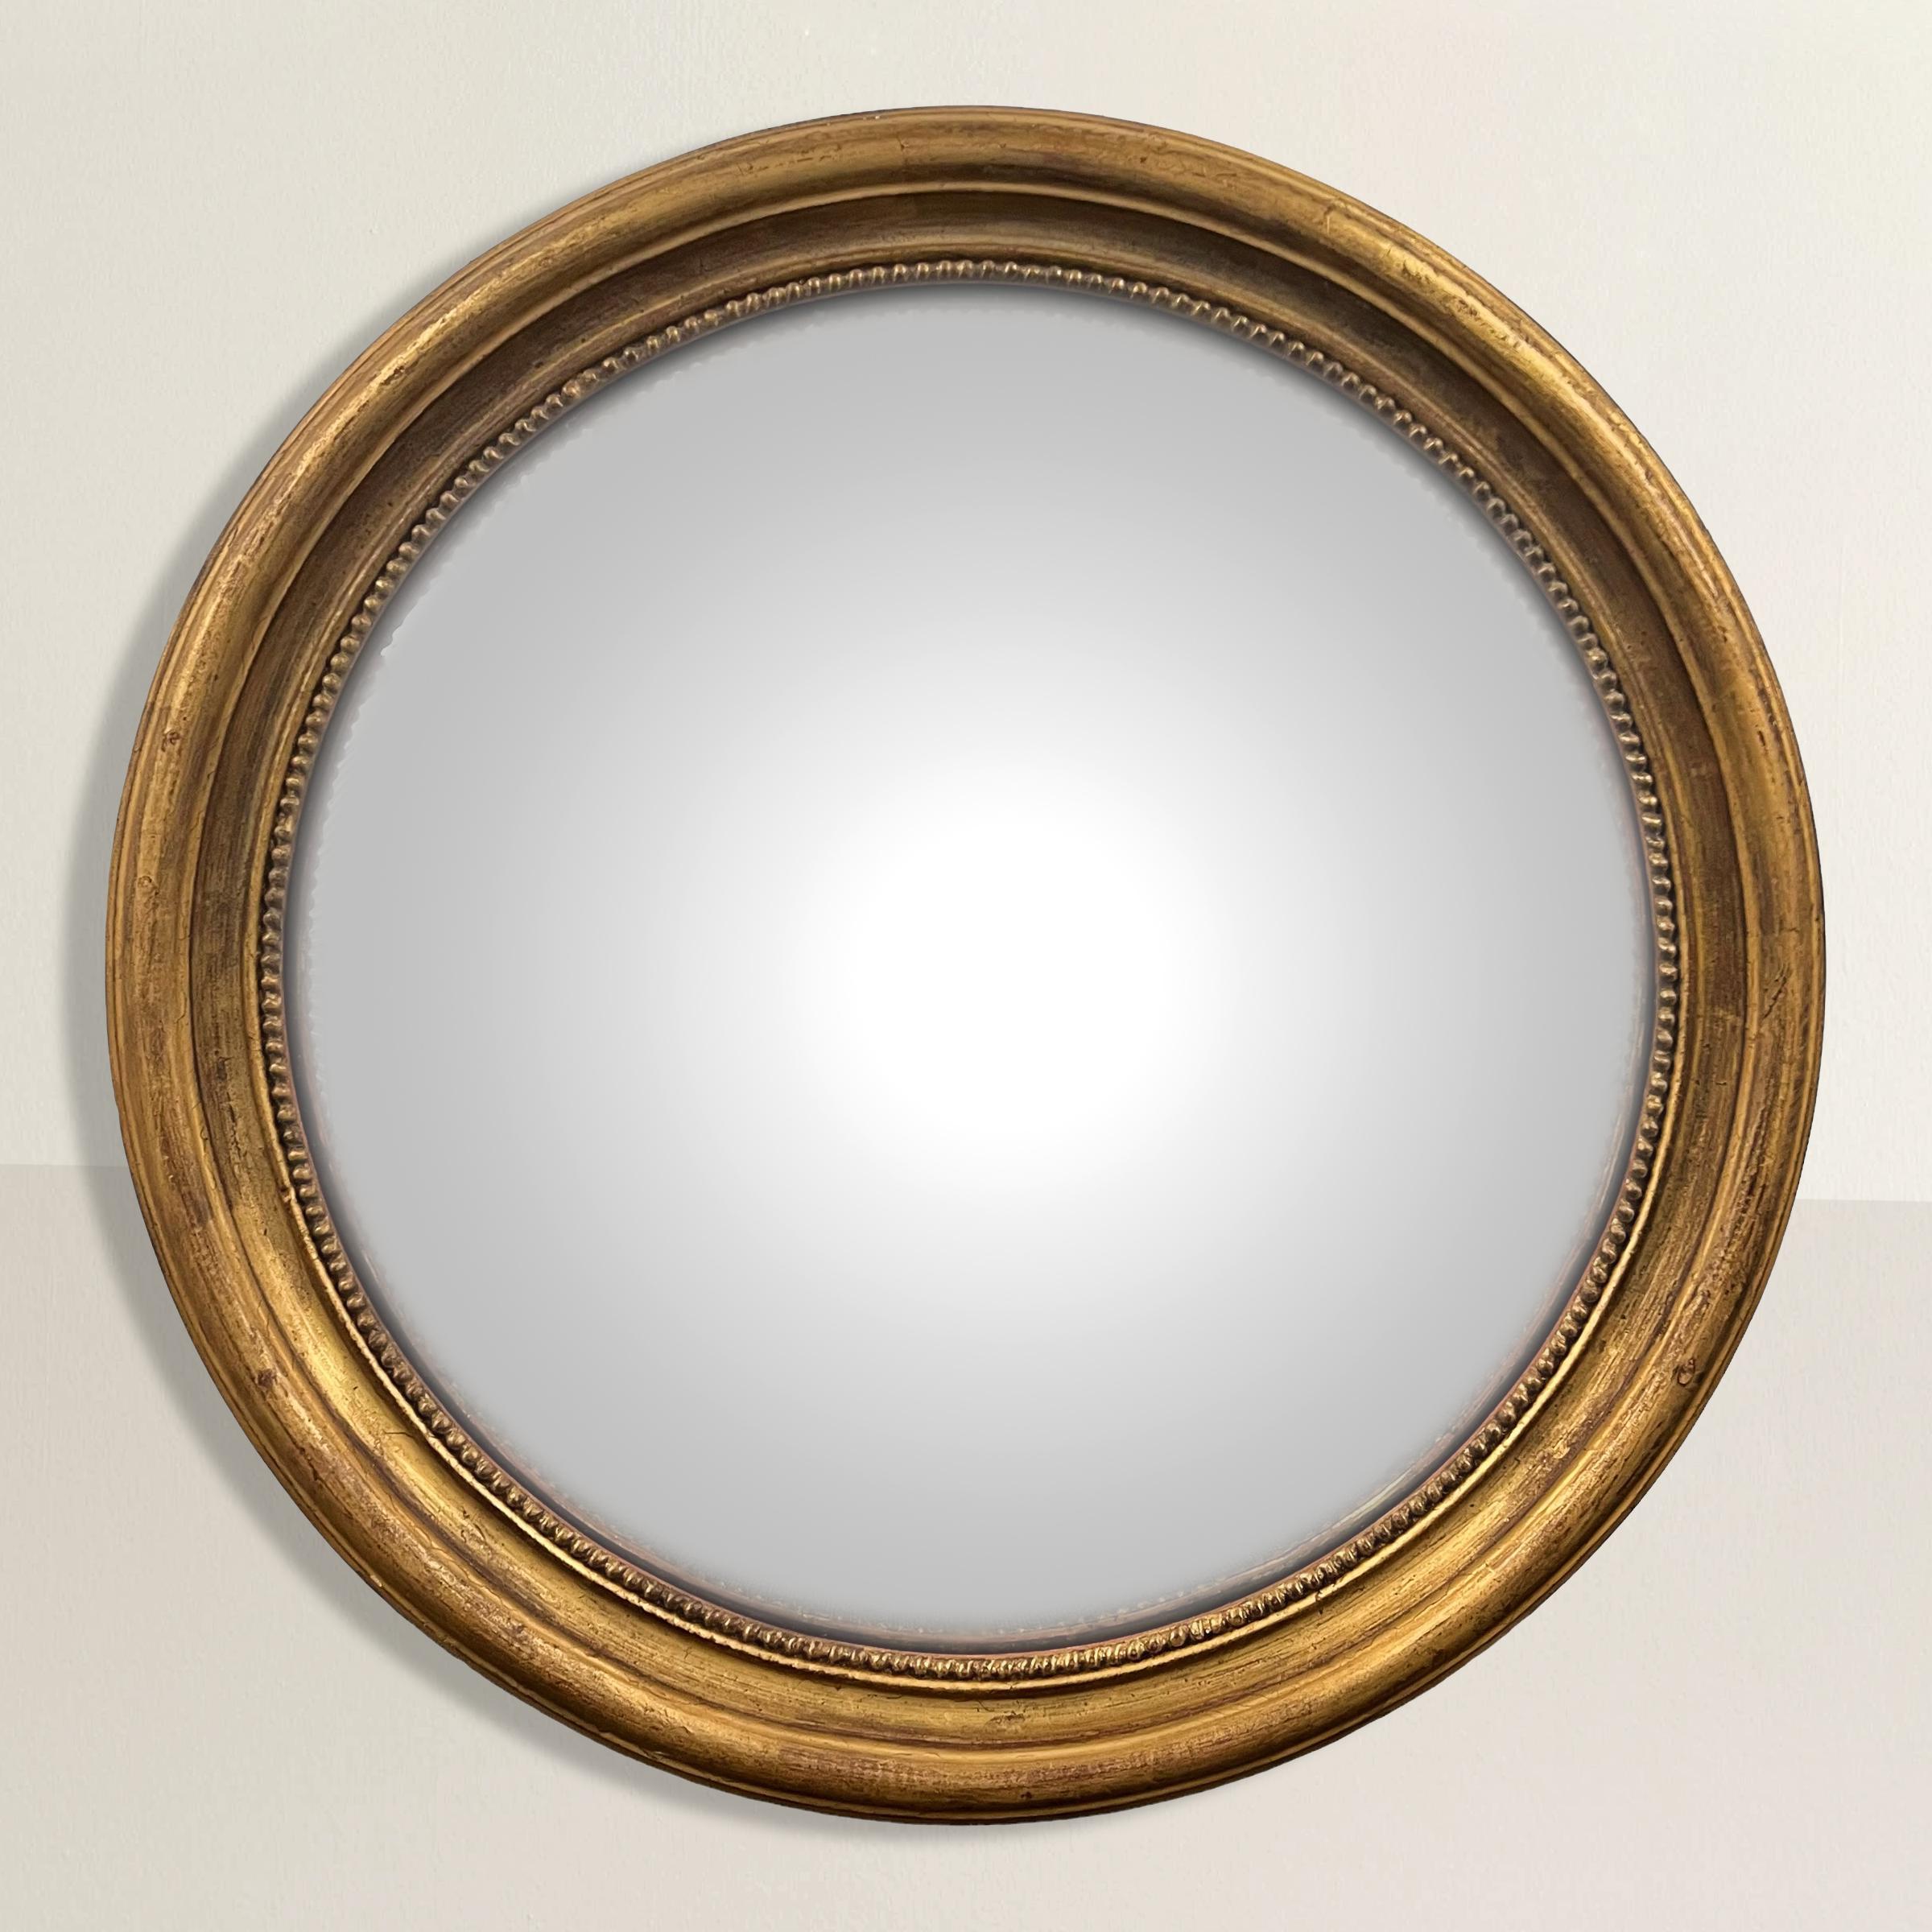 Embrace the opulence of Neoclassical design with this stunning 20th century American gilt wood framed large round convex mirror. Evoking the grandeur of classical design, its intricate frame exudes timeless elegance, reminiscent of the luxurious